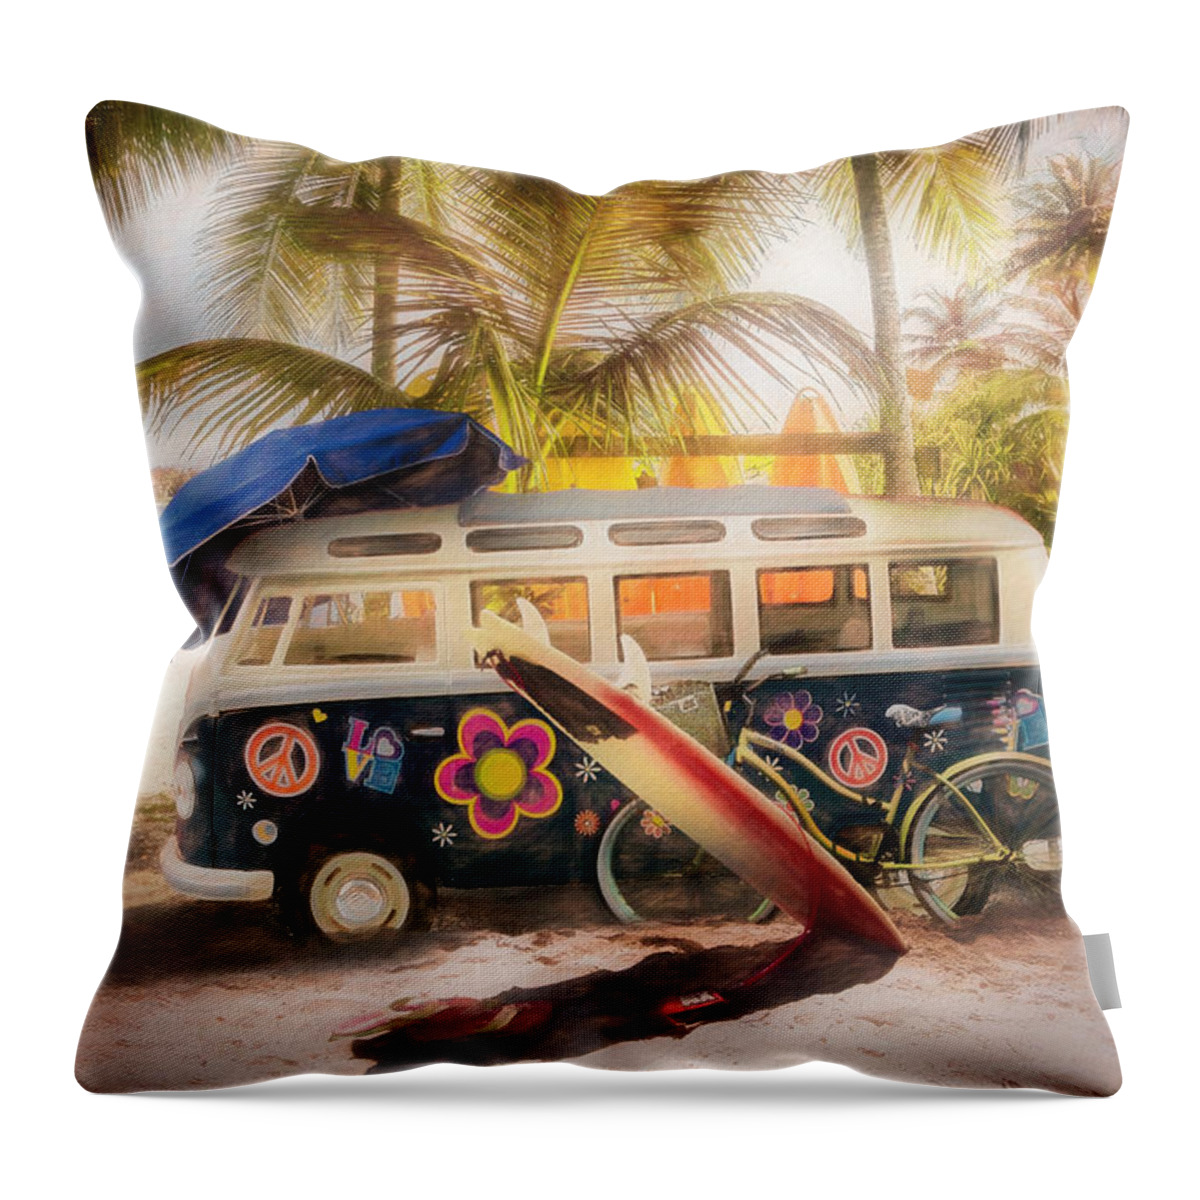 African Throw Pillow featuring the photograph Caribbean Island Surf Mood Oil Painting by Debra and Dave Vanderlaan